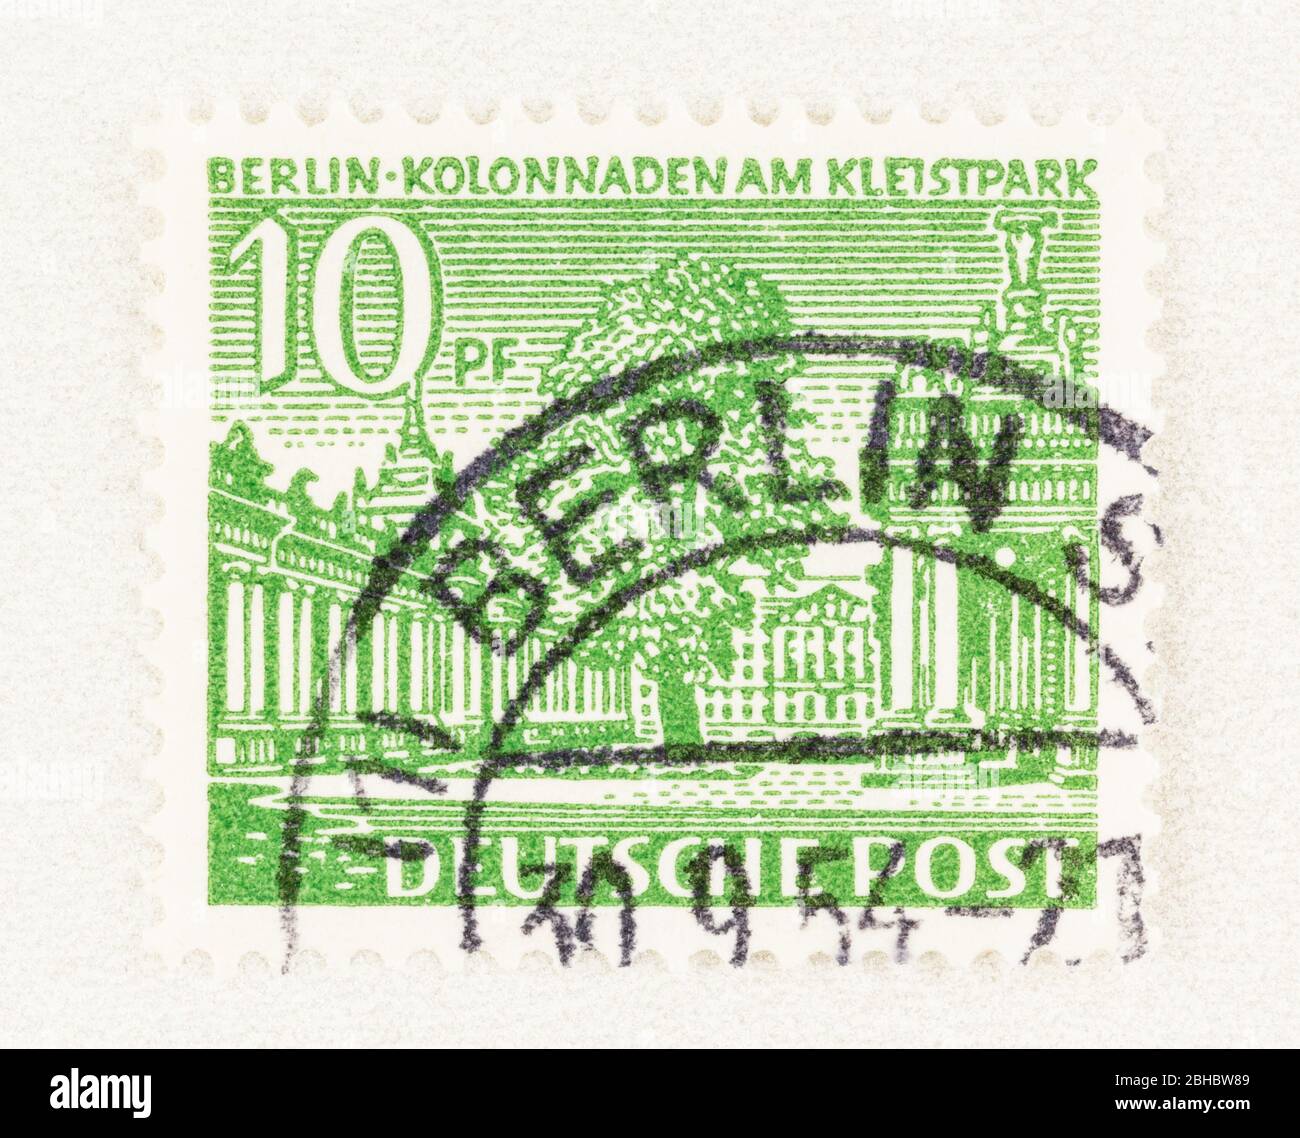 SEATTLE WASHINGTON - April 23, 2020: East German stamp featuring Colonnade at the Kleistpark, Schoneberg with Berlin postmark. Stock Photo